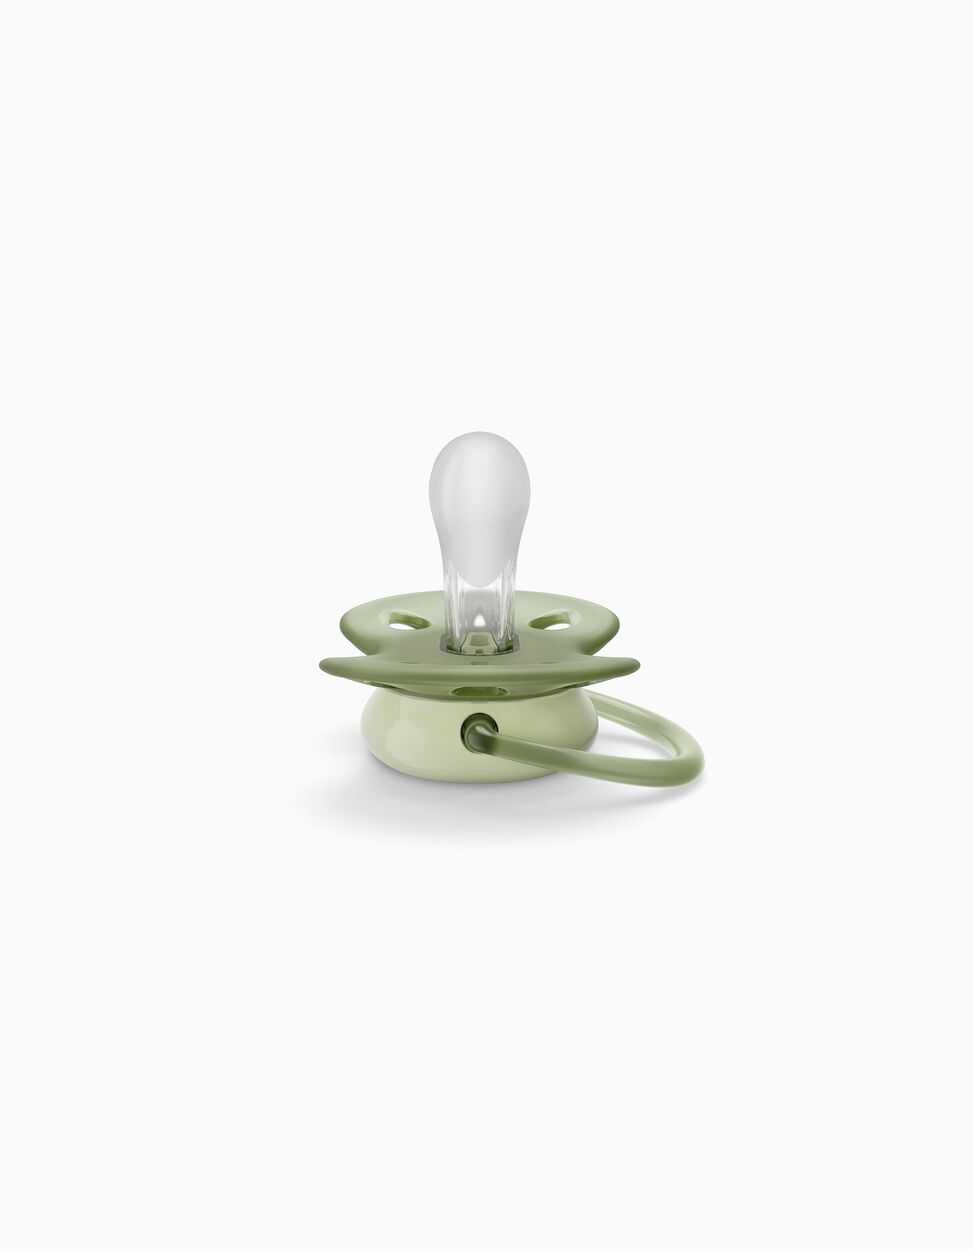 2 Chupetas Philips/Avent Ultra Soft Silicone 0-6M, Verde/Bege